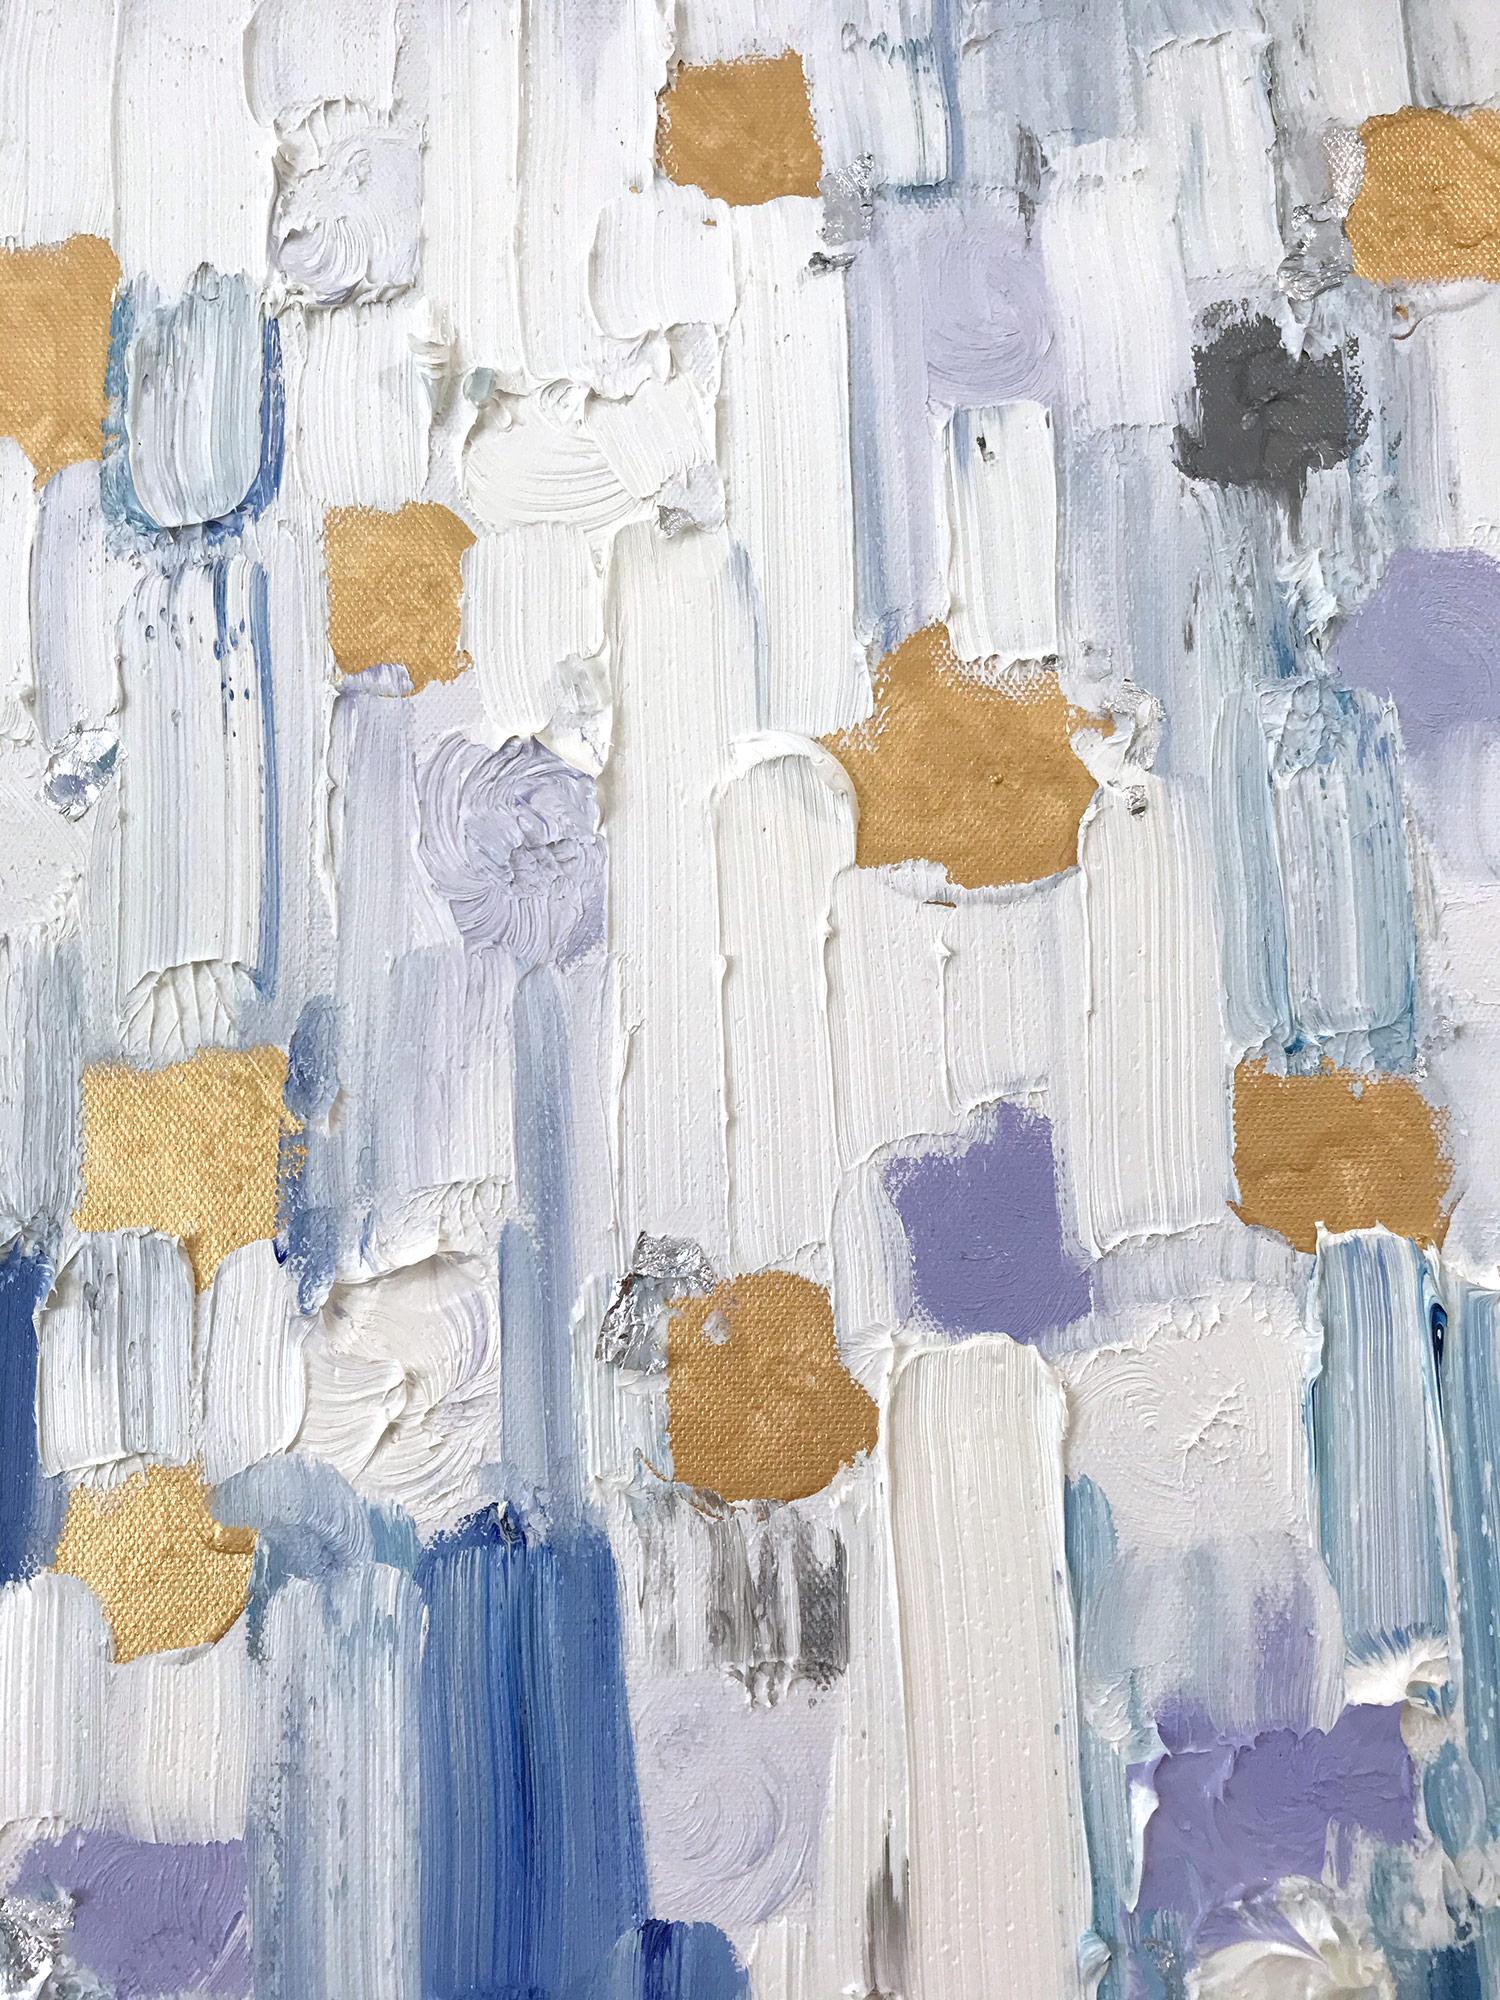 With layers of bright oils and whisking brush strokes, the paint is able to shine and shimmer in a very unique pattern. The artist uses silver leaf with thick textured oils and glass to add a very contemporary, urban feel. The way the paint blends